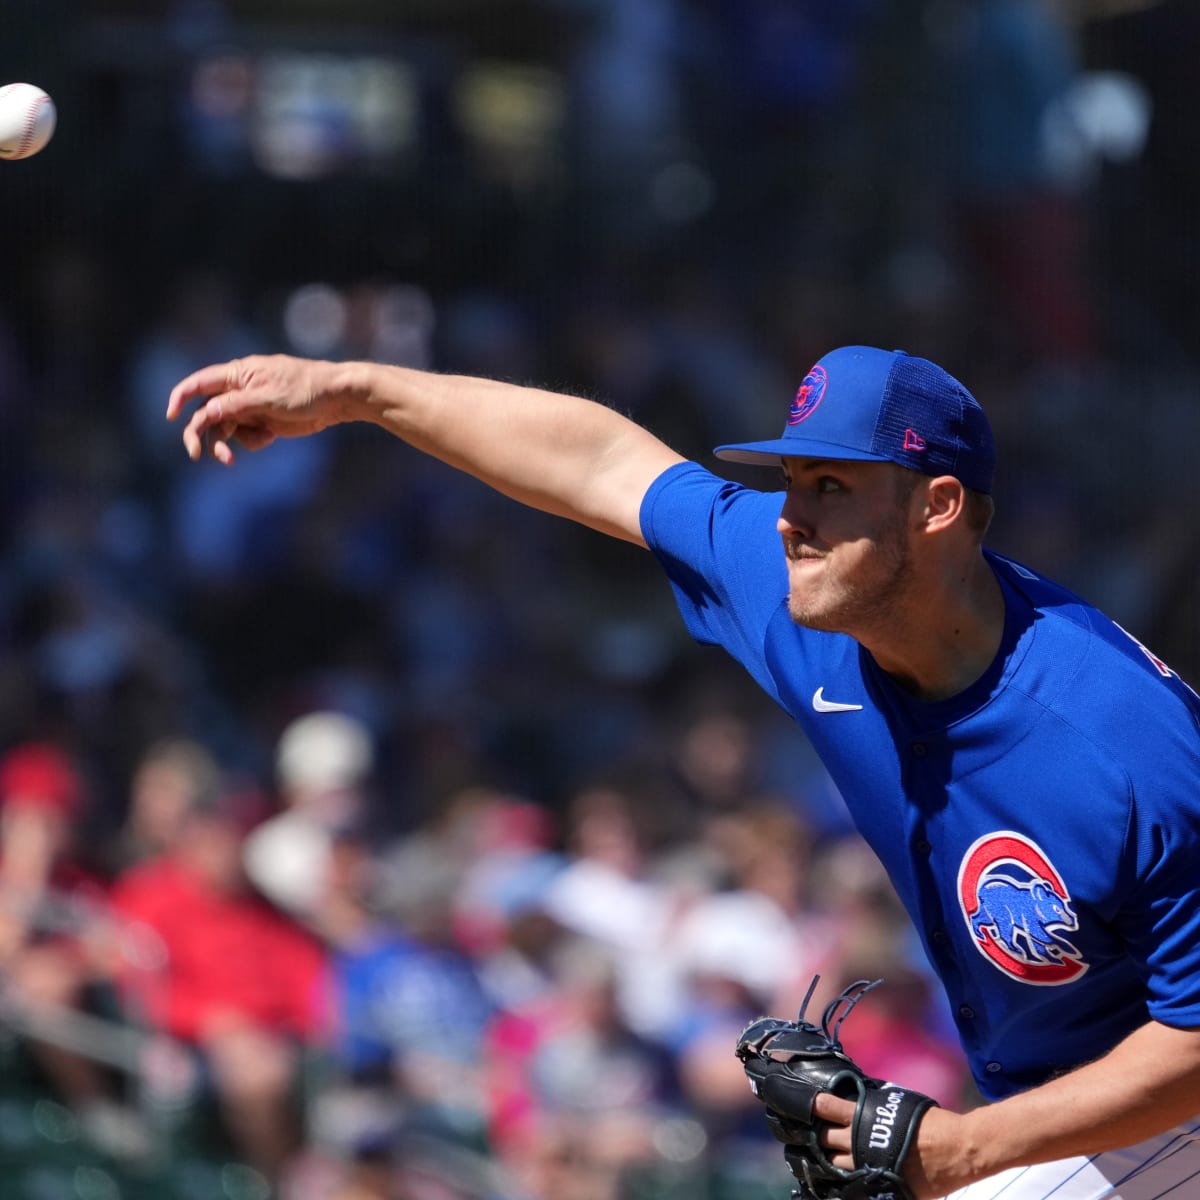 Taillon working on new slider in spring training with Cubs - The